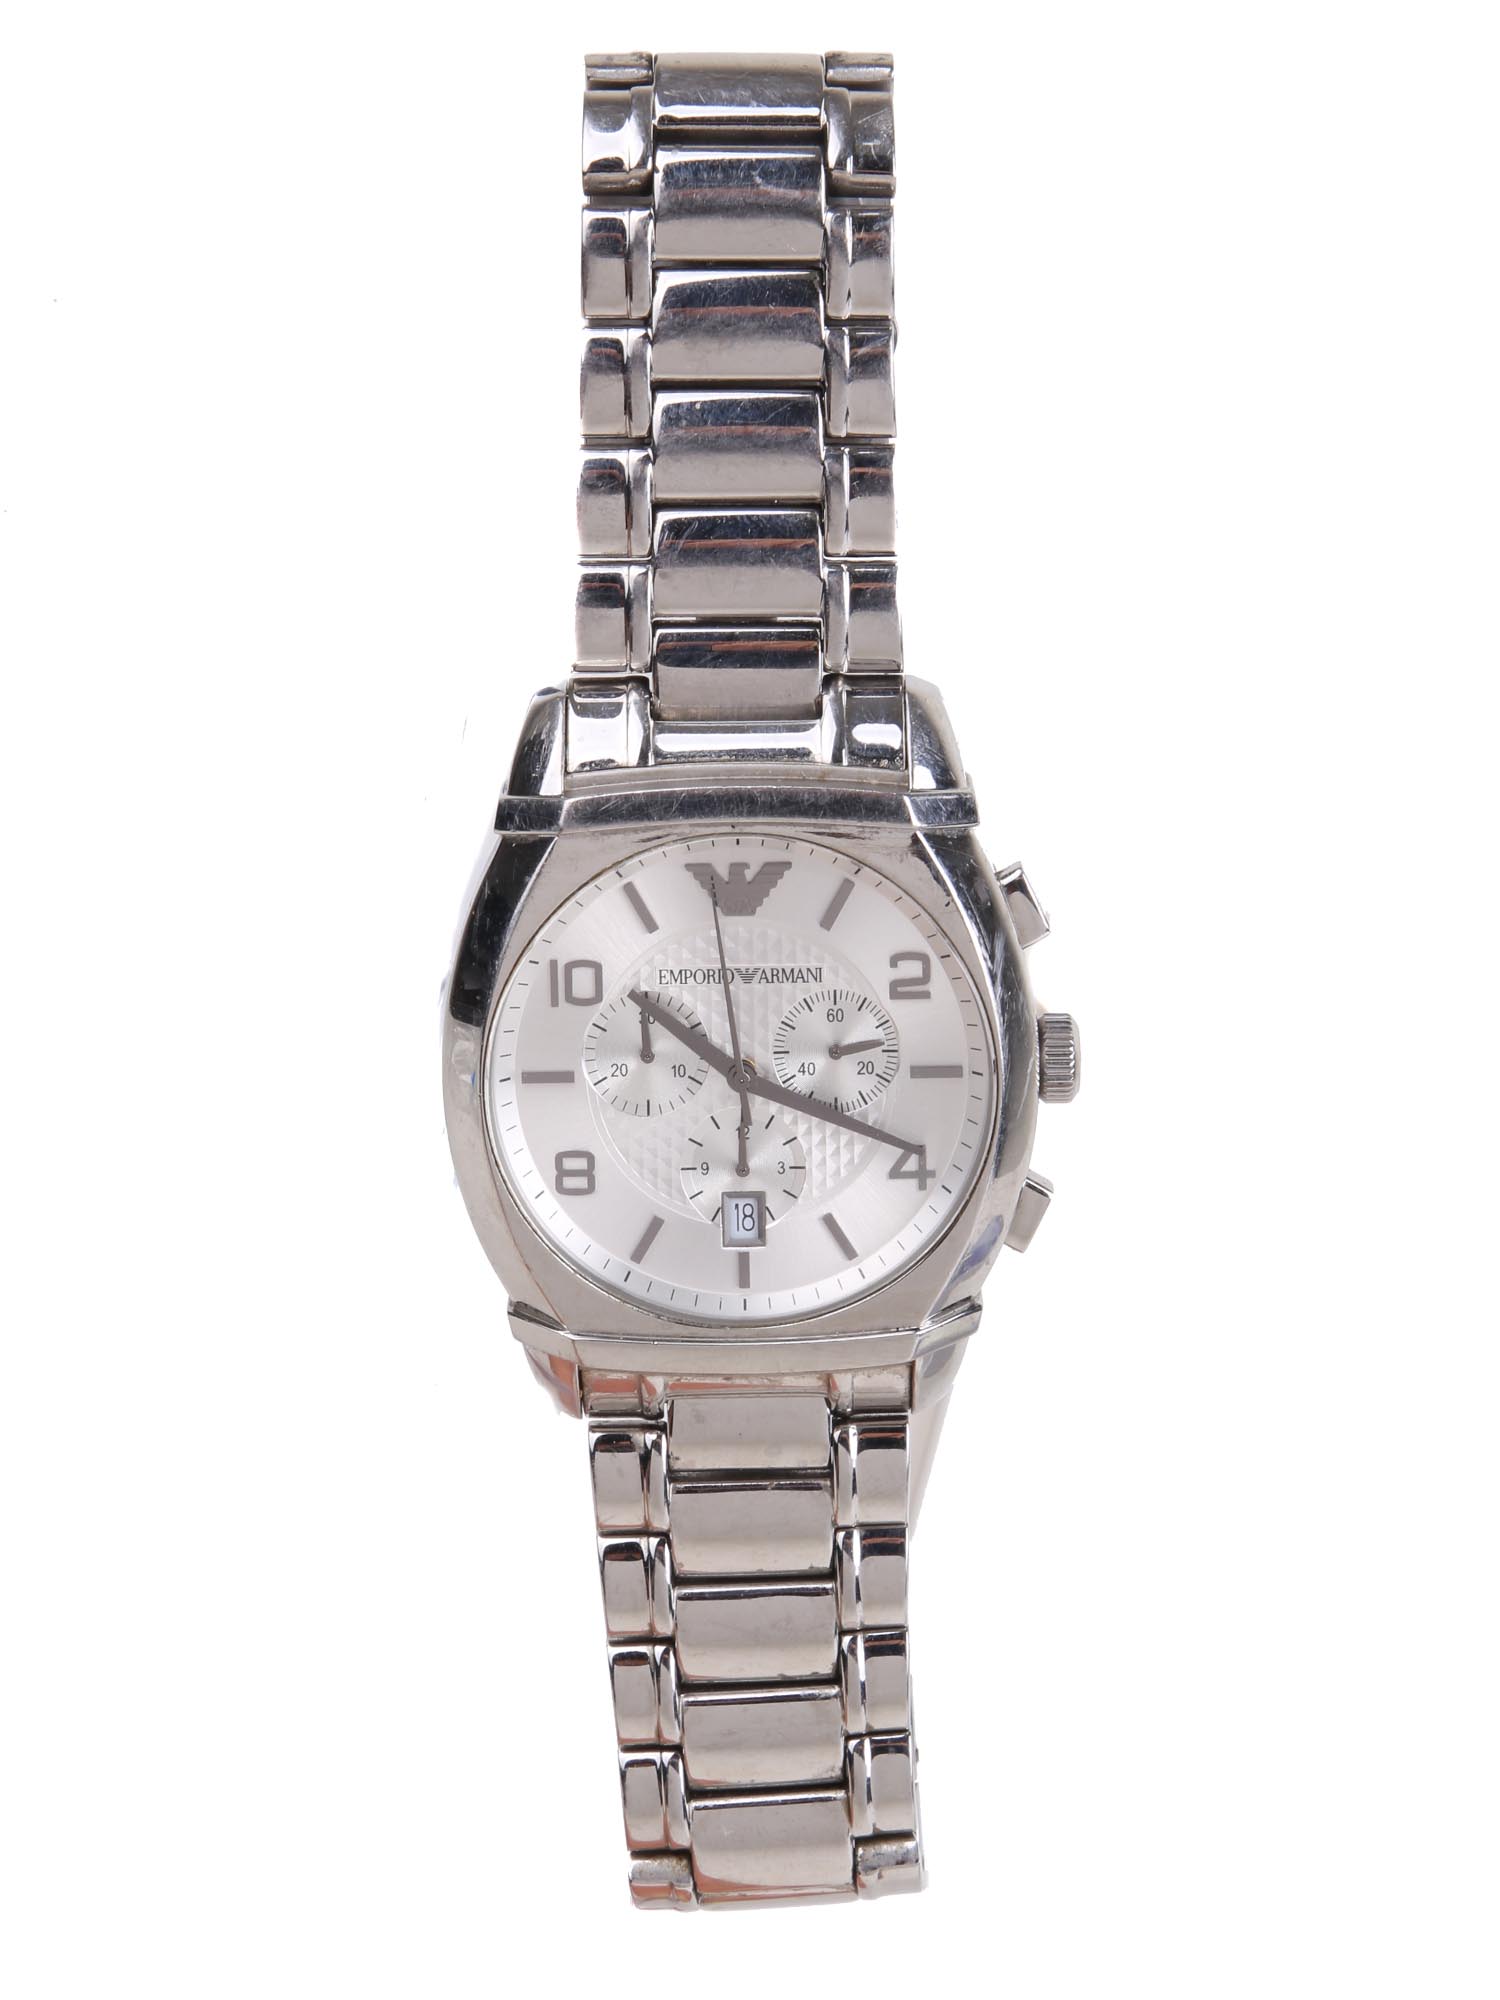 AN EMPORIO ARMANI MEN STAINLESS STEEL WRIST WATCH PIC-0